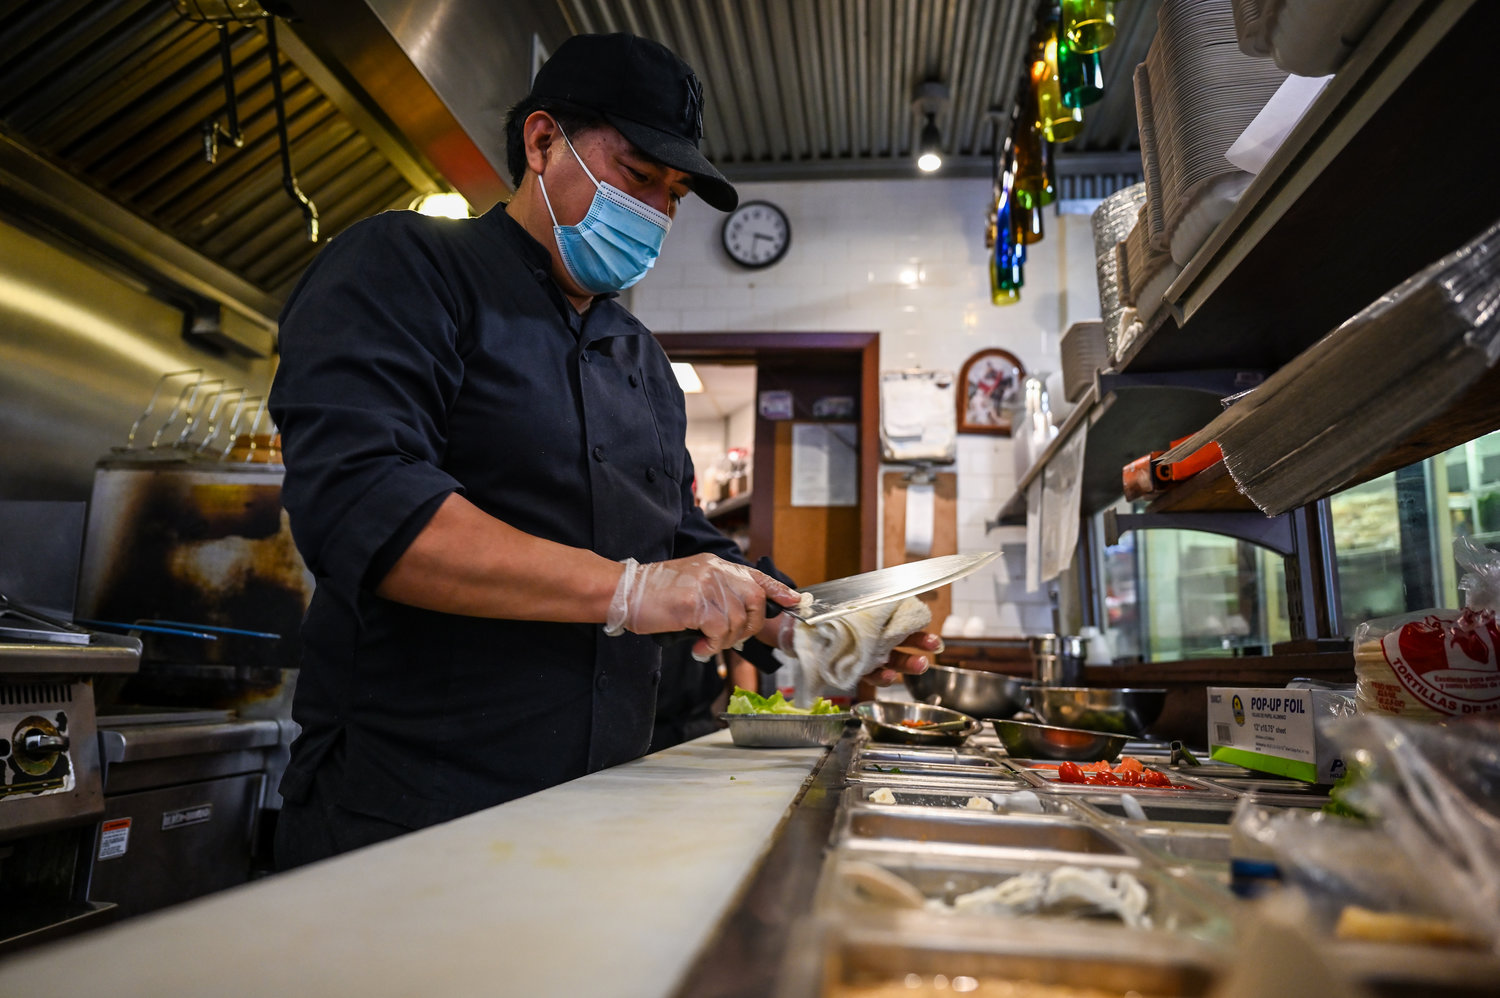 A cook at Taste & Sabor on West 231st Street and Riverdale Avenue cleans his knives during a lull in customers. While the eatery is known for its Latin and Greek fare, some neighbors in need have discovered that when Taste & Sabor receives more food than it needs, it’s willing to share.